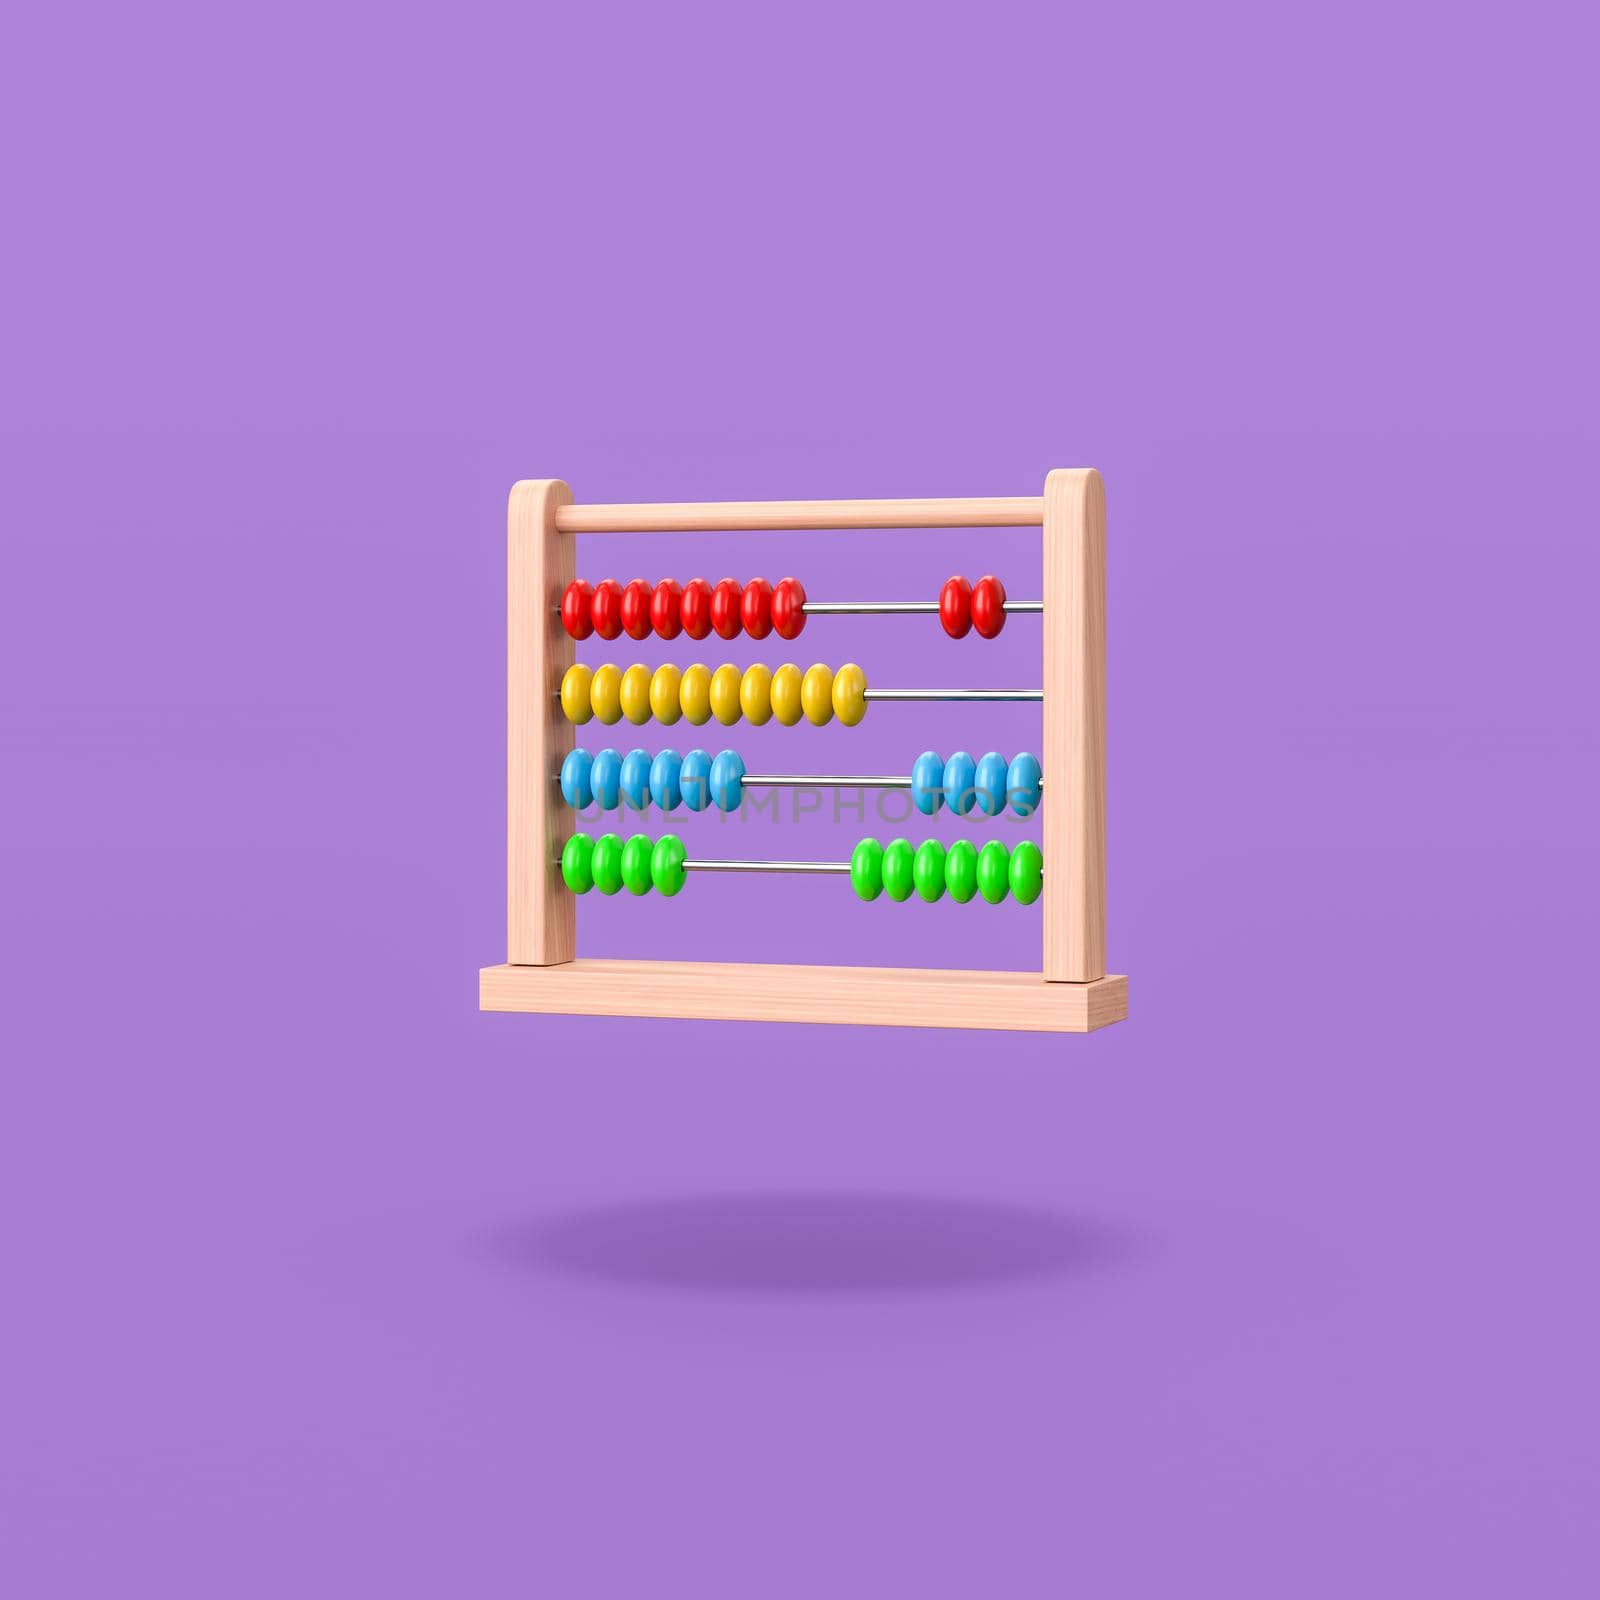 Colorful Wooden Abacus Isolated on Flat Purple Background with Shadow 3D Illustration